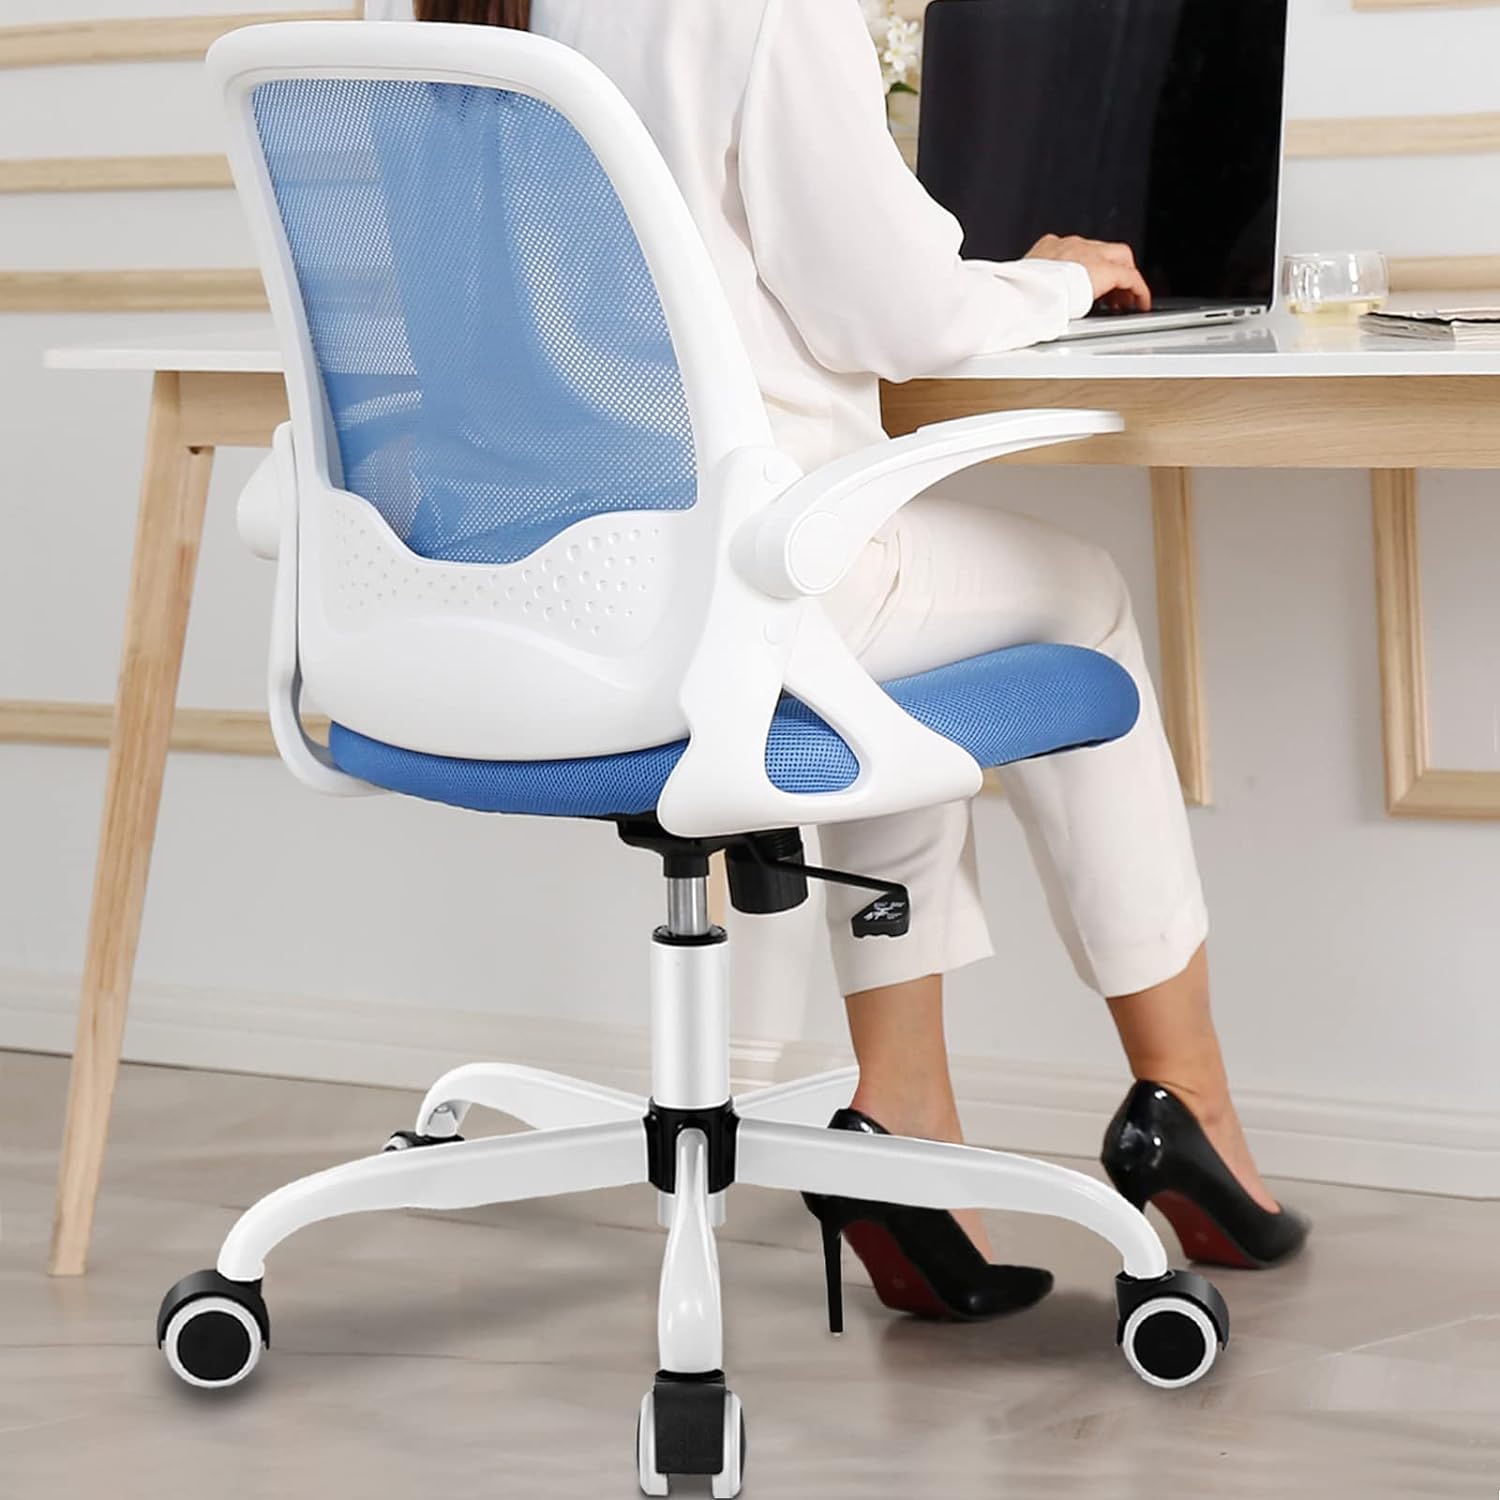 The Sunnow Chair has an ergonomic design that follows the natural curve of your spine. This helps to reduce back pain and improve your posture